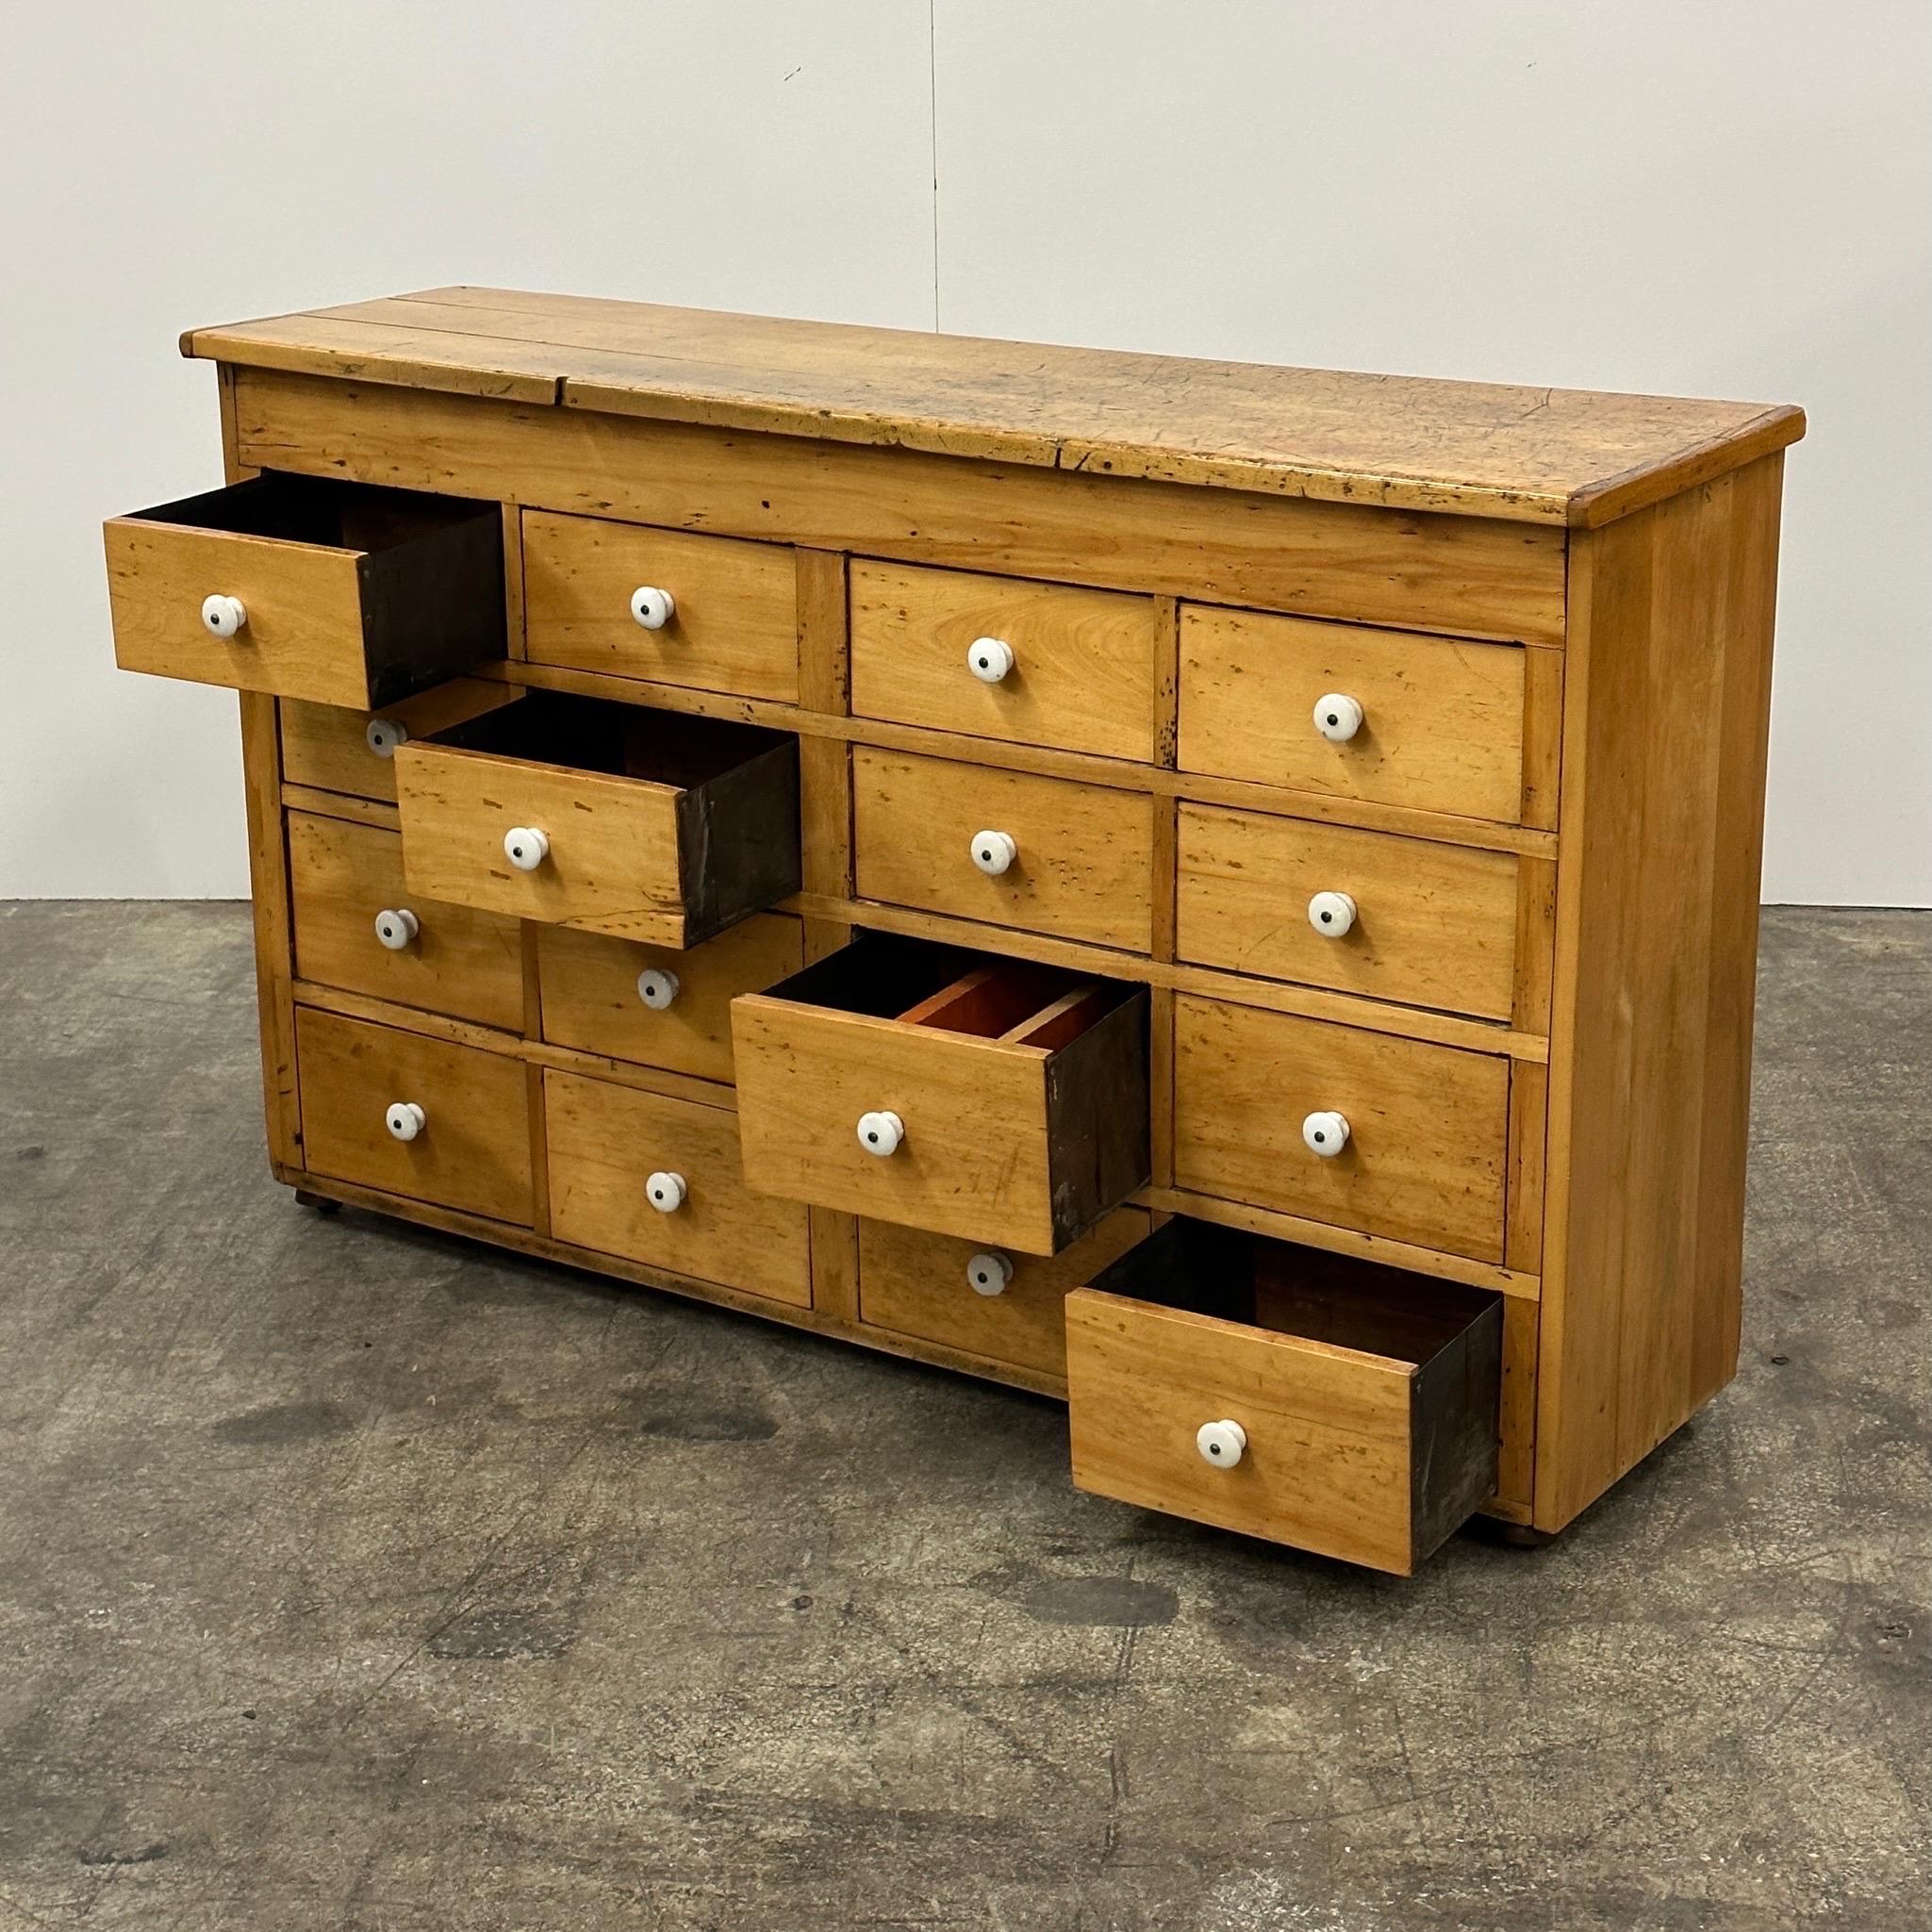 c. 1920s. Full wood construction with metal drawers. Ceramic knobs. One of a kind. 